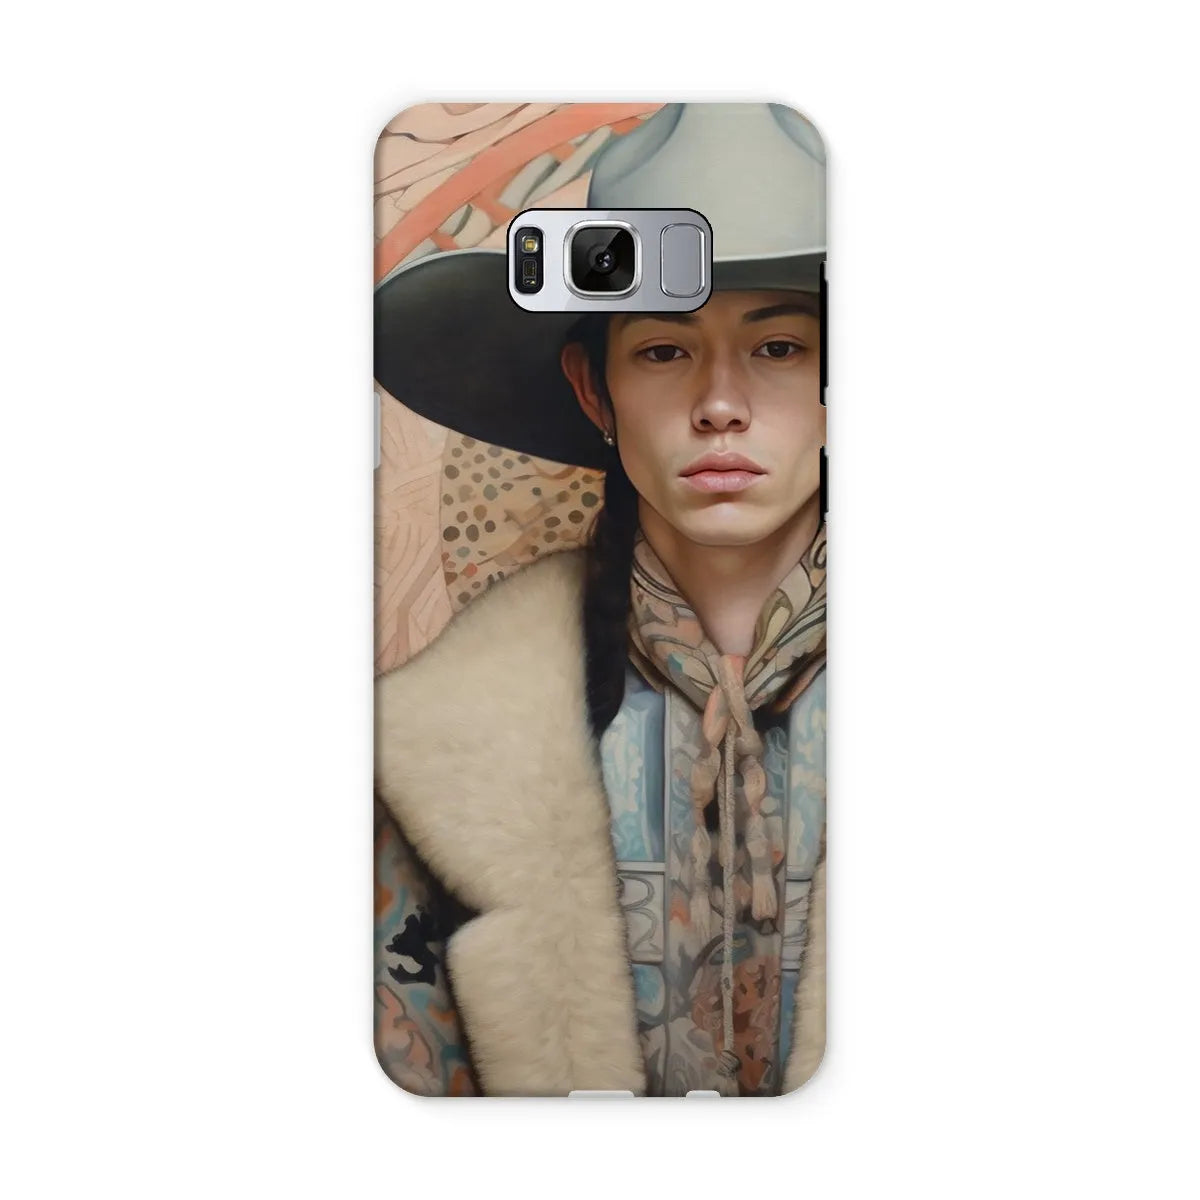 Jacy The Gay Cowboy - Dandy Gay Aesthetic Art Phone Case - Samsung Galaxy S8 / Matte - Mobile Phone Cases - Aesthetic